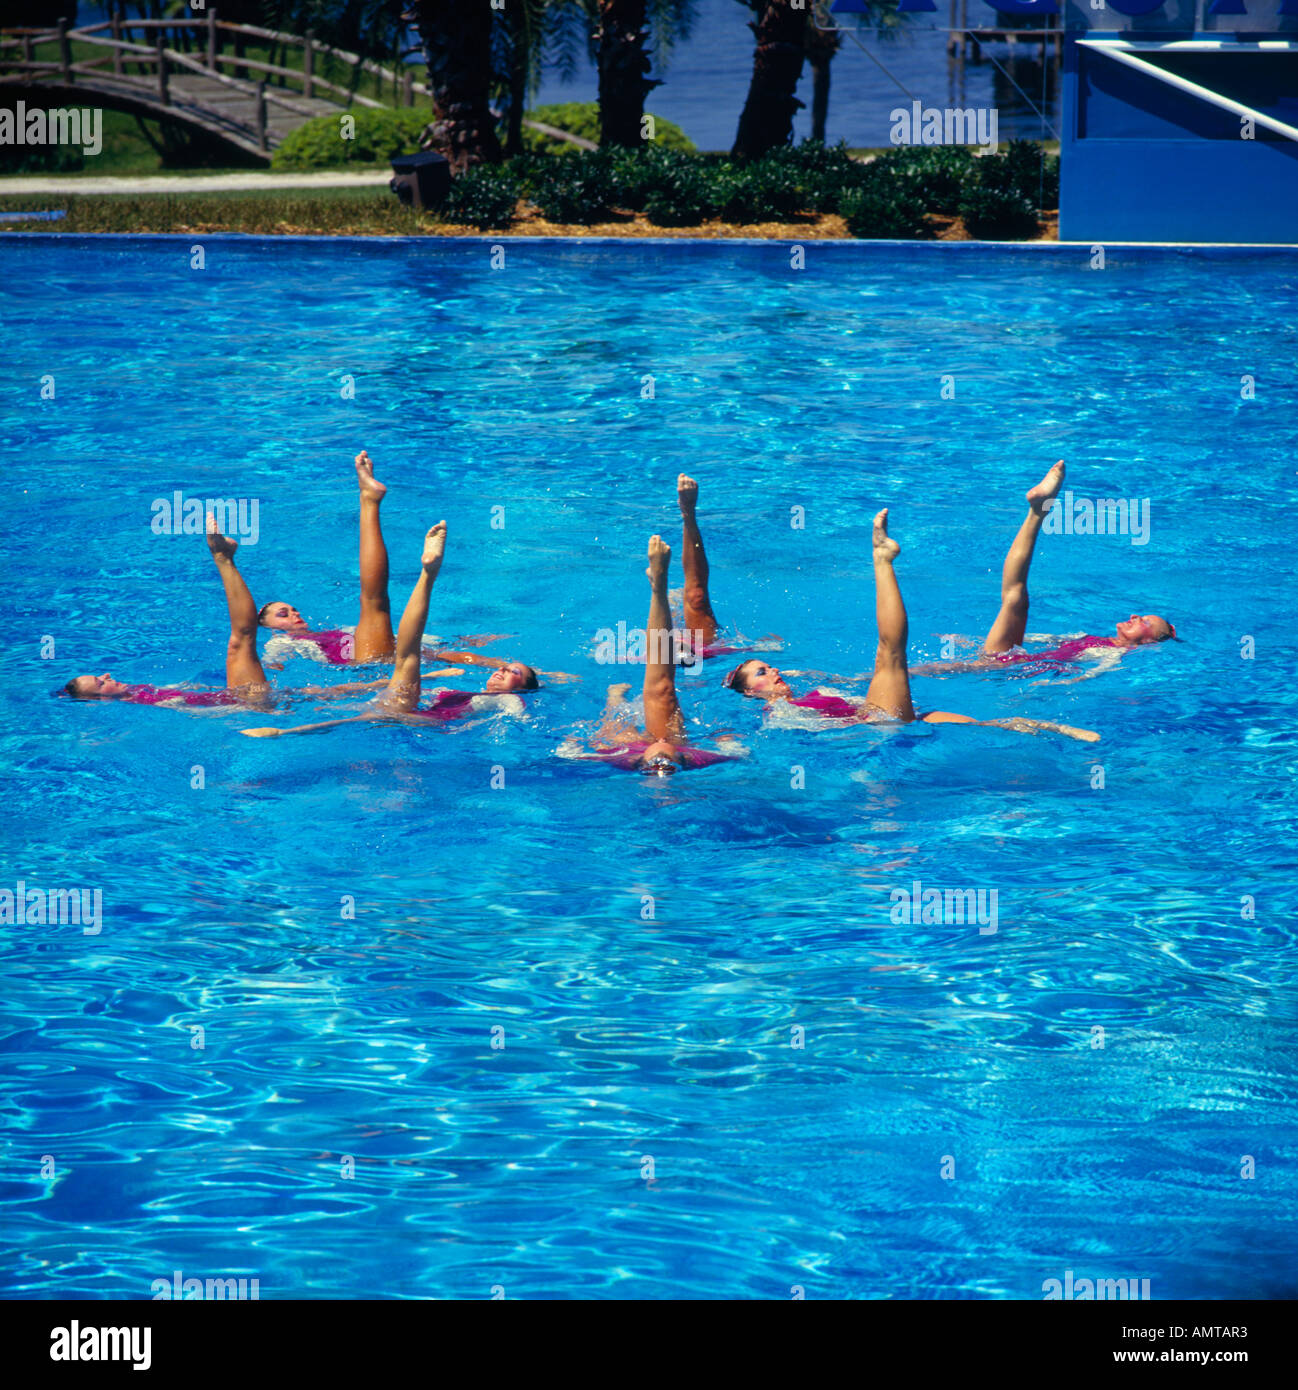 Synchronized swimming performed by six women in bright pink bathing suits legs pointing upwards in swimming pool Florida USA Stock Photo